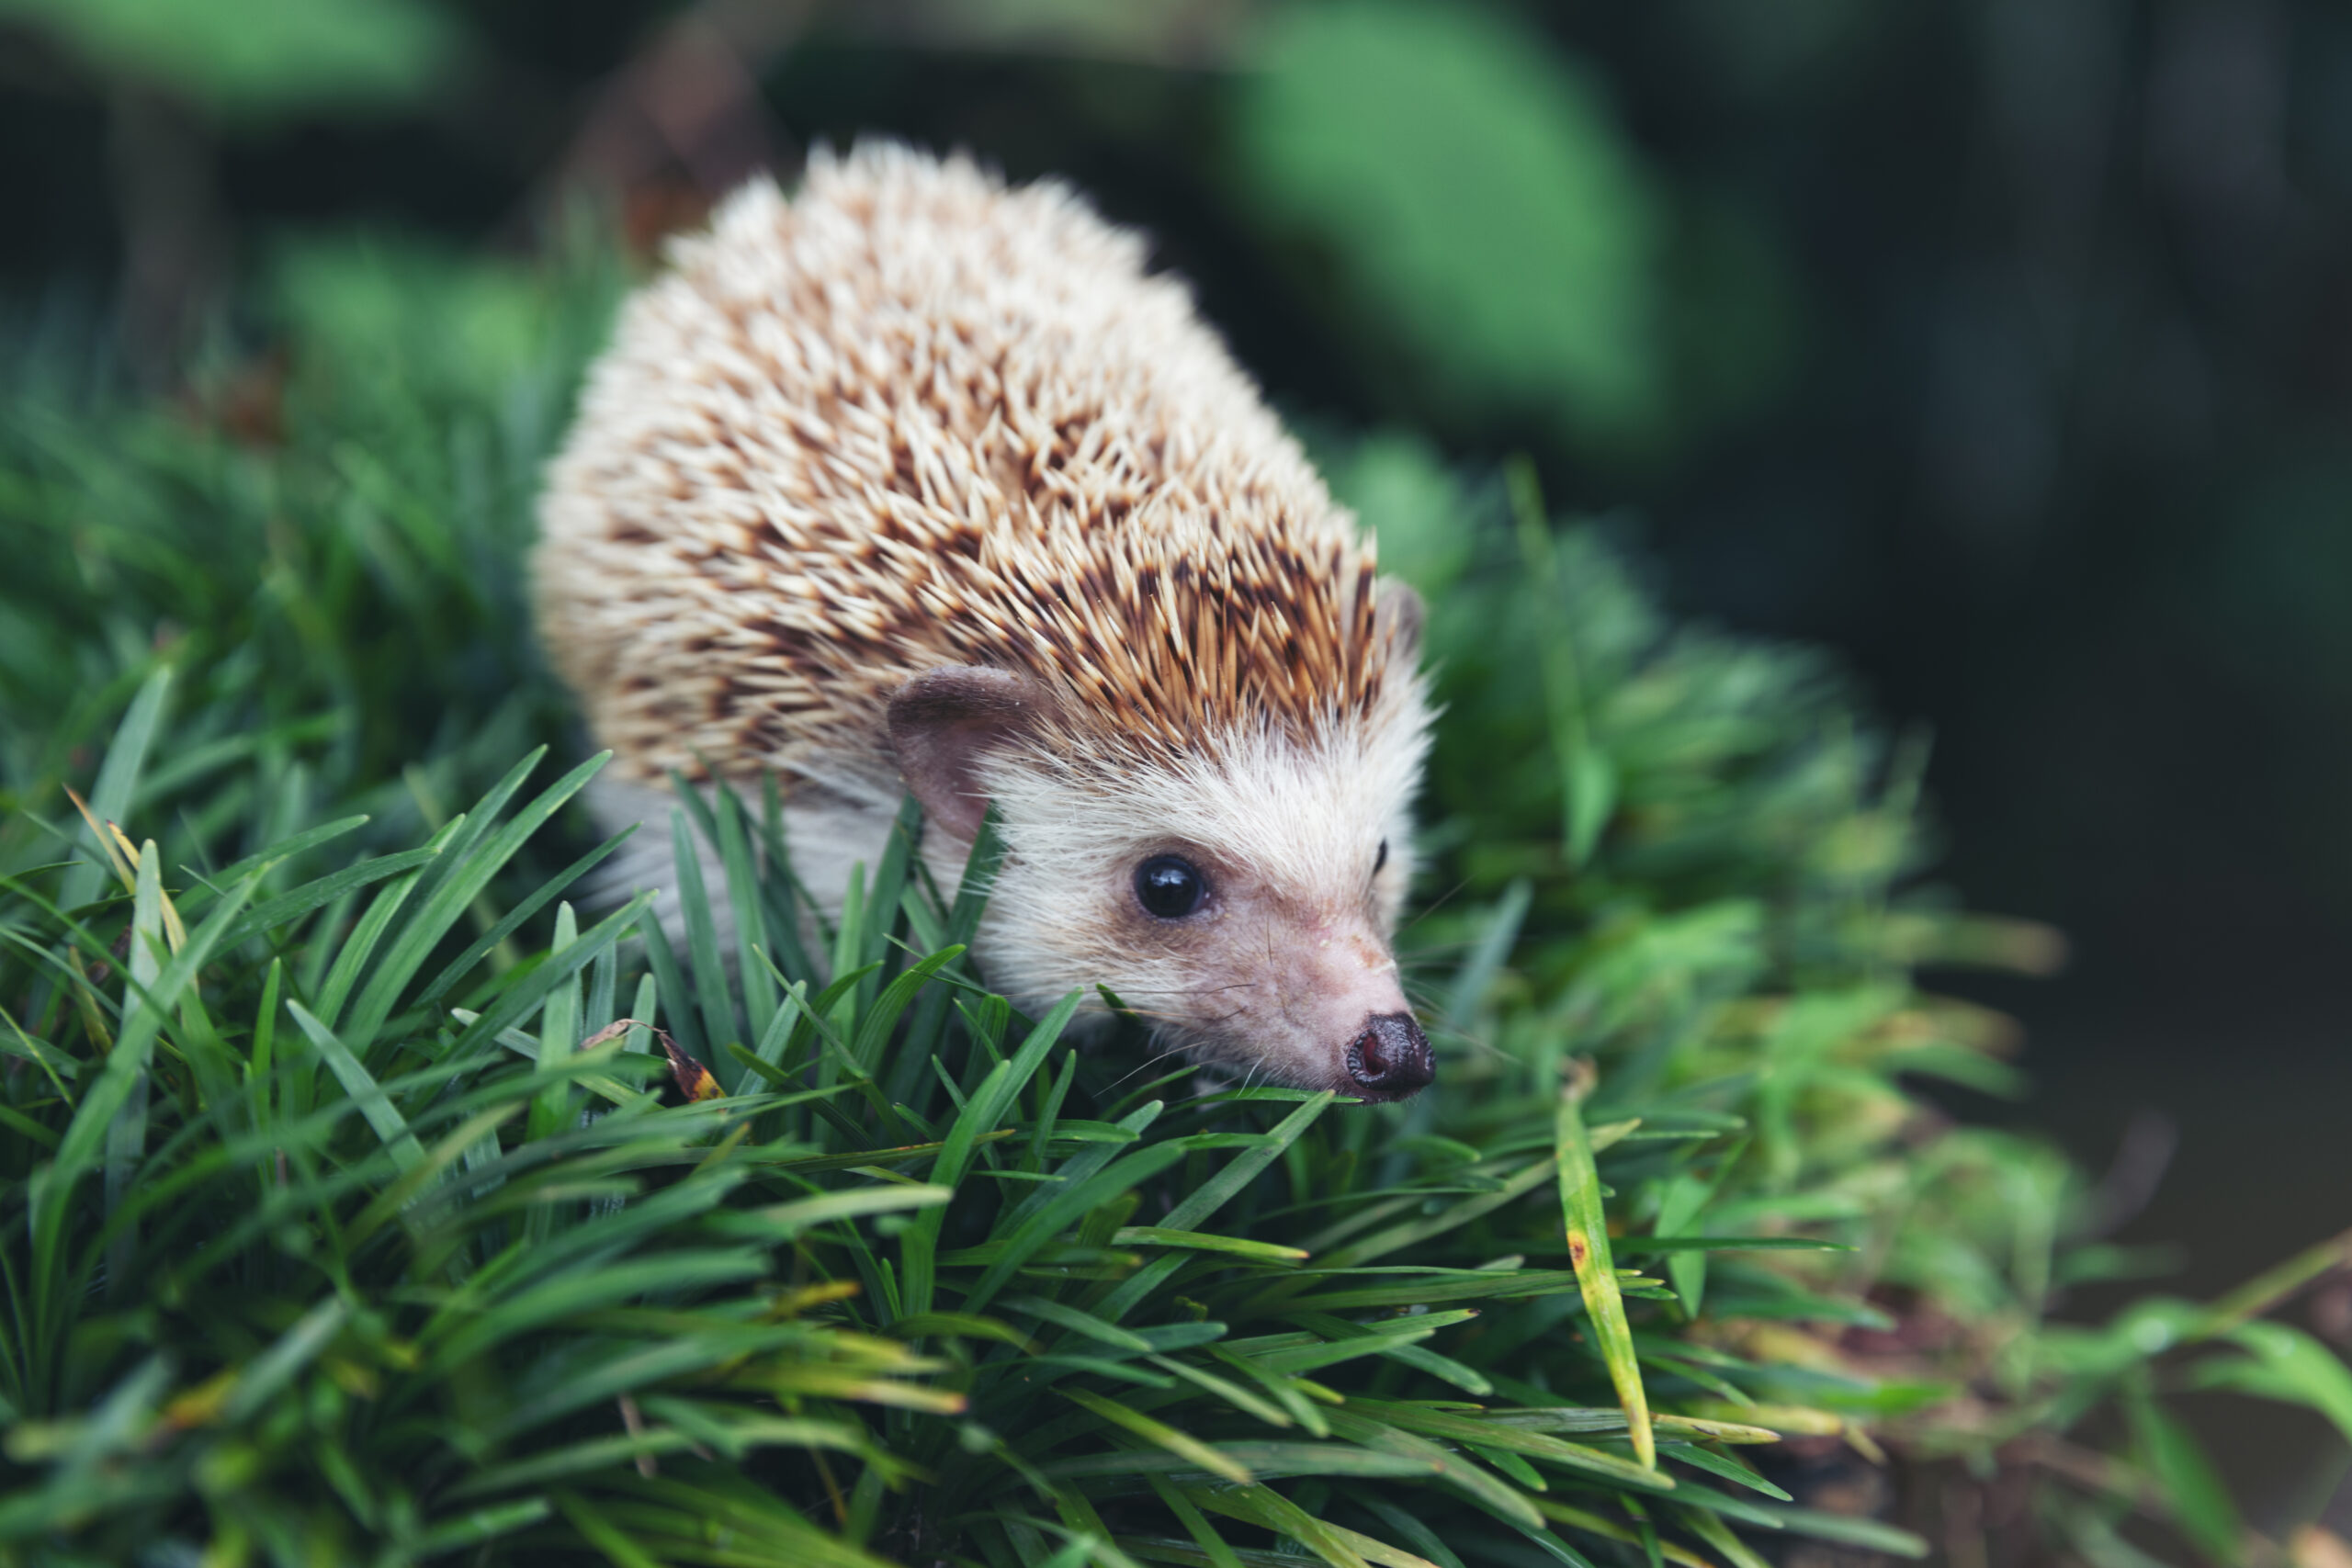 A Hedgehog Species in the grass